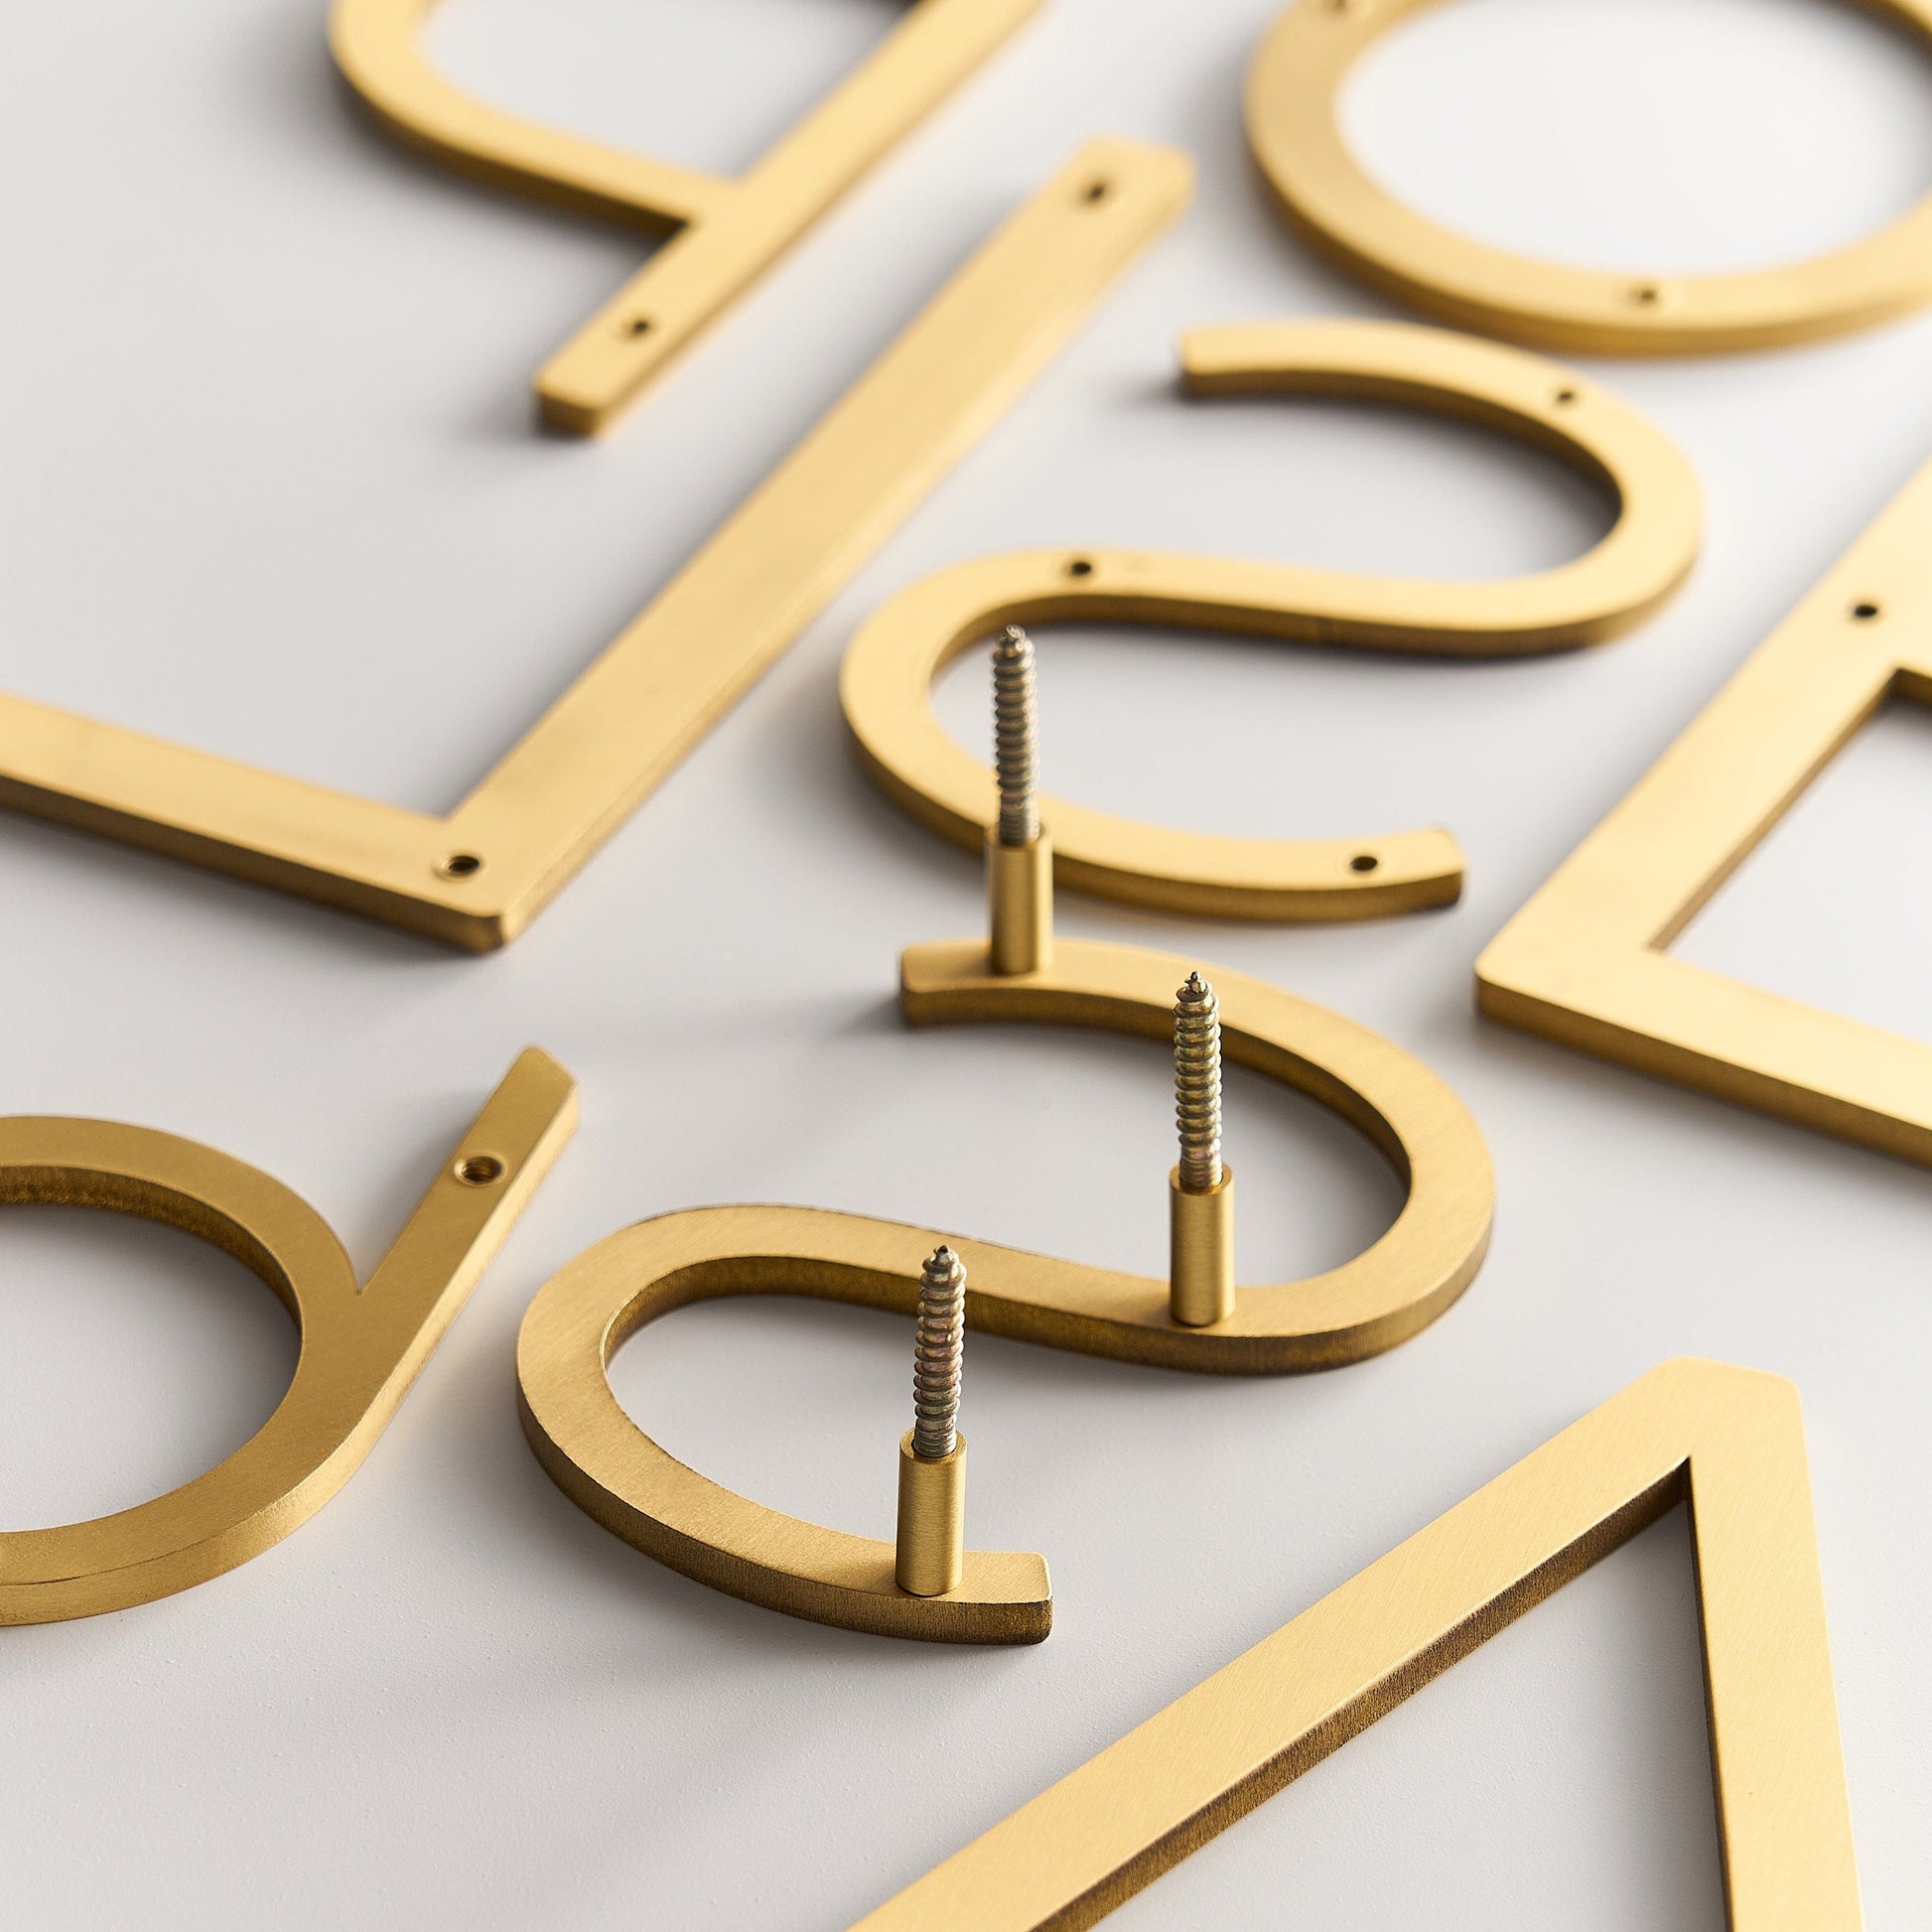 House Numbers and Letters Bayside Luxe Signage - Solid Satin Brass Floating House Numbers and Letters - Watson's Bay 20cm